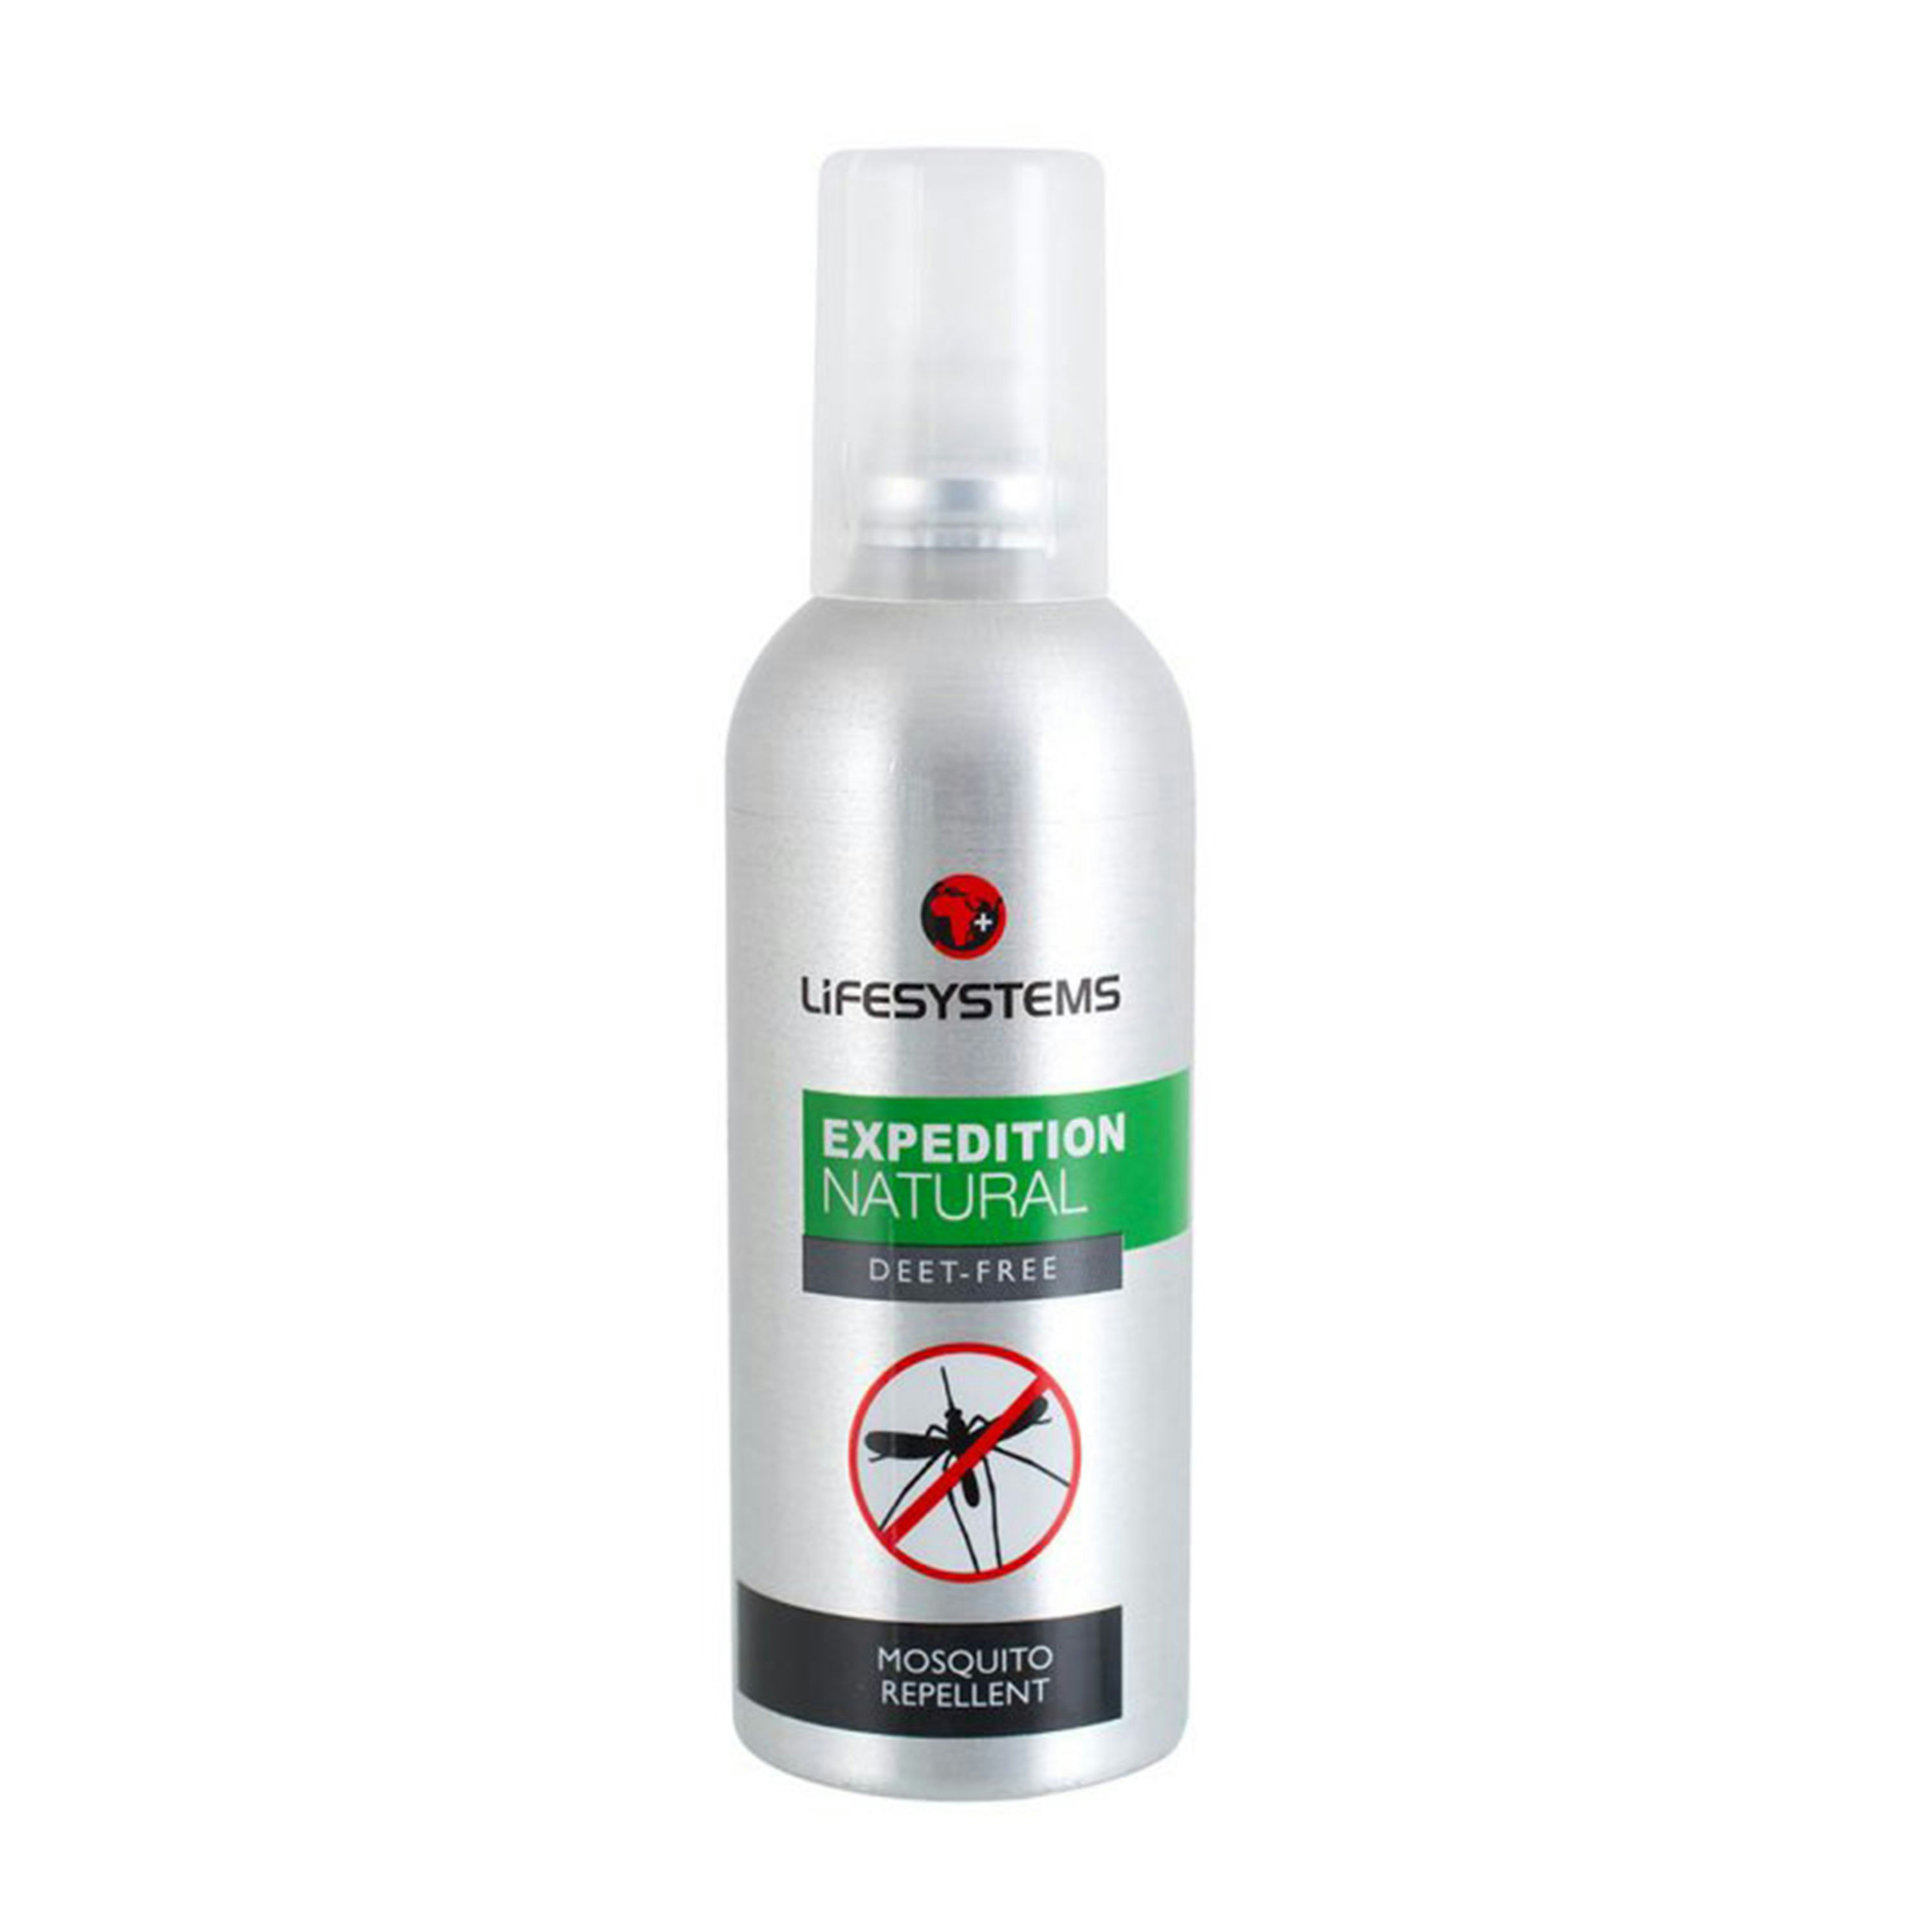 Lifesystems(r) Expedition Natural Mosquito Repellent 100ml